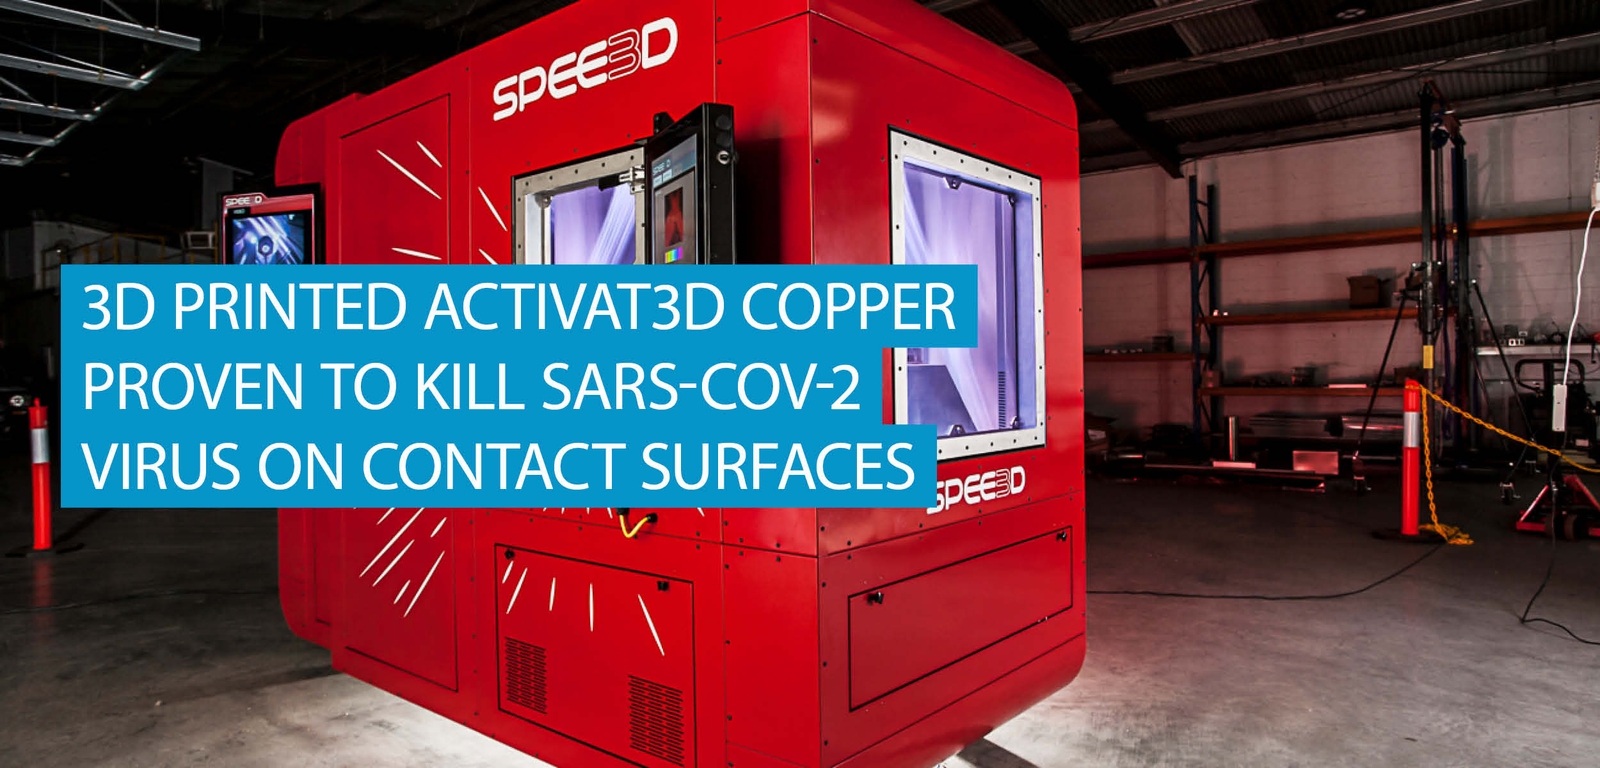 3D Printed ACTIVAT3D Copper Proven to Kill SARS-CoV-2 Virus on Contact Surfaces